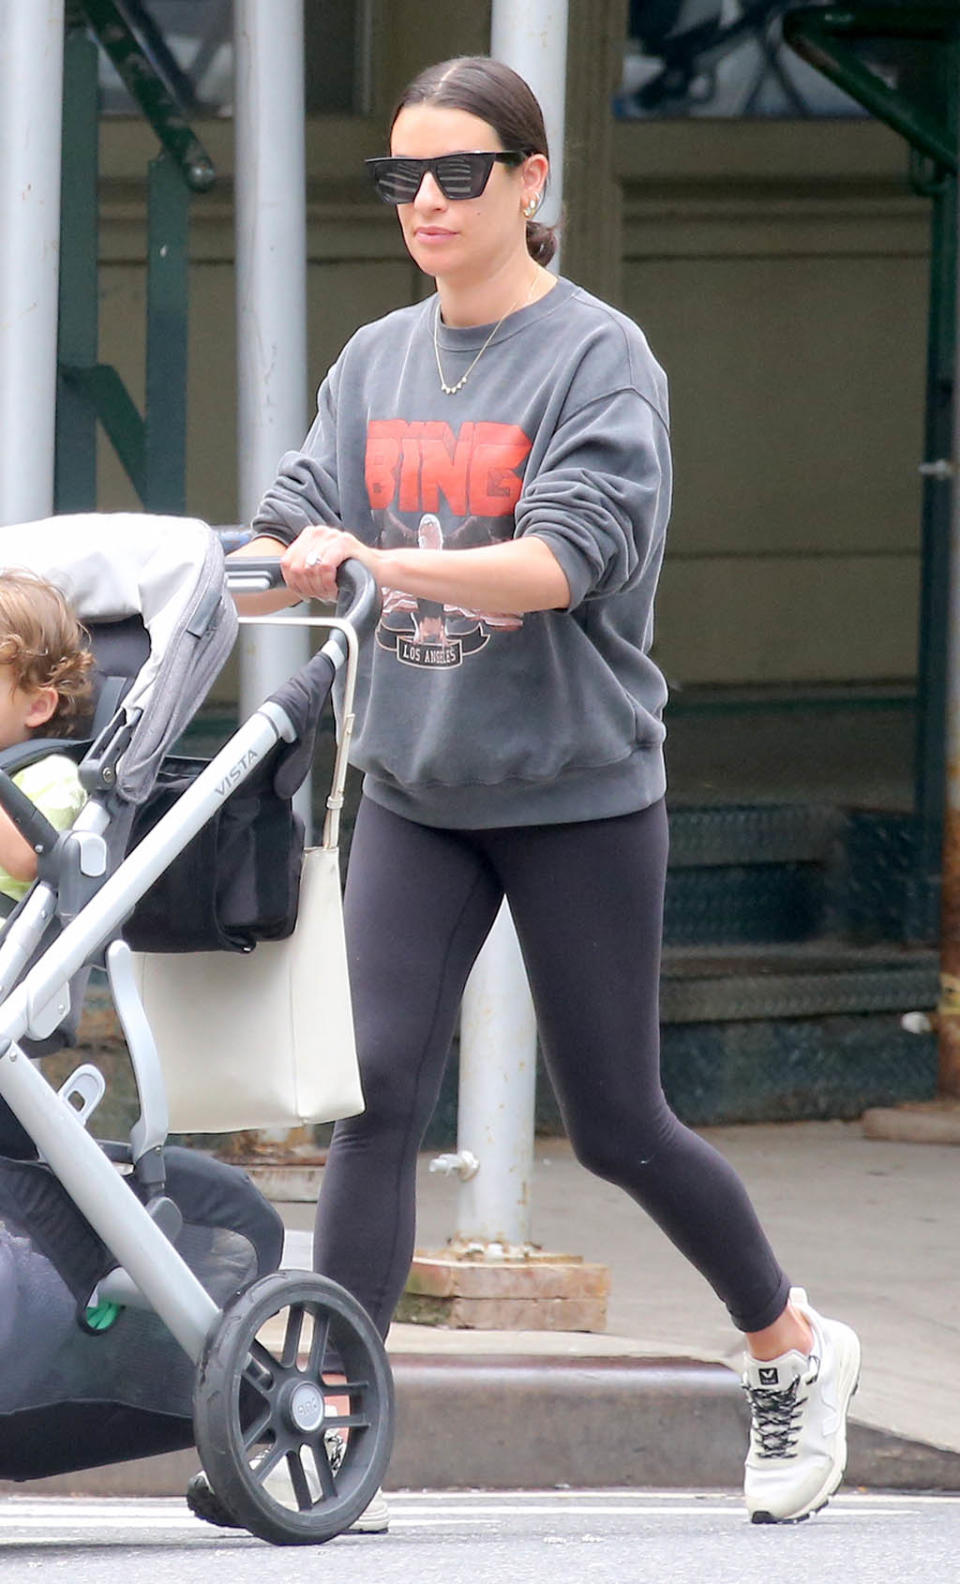 Lea Michele takes a stroll with her son in Tribeca, New York City on June 23, 2022. - Credit: AbacaPress / SplashNews.com